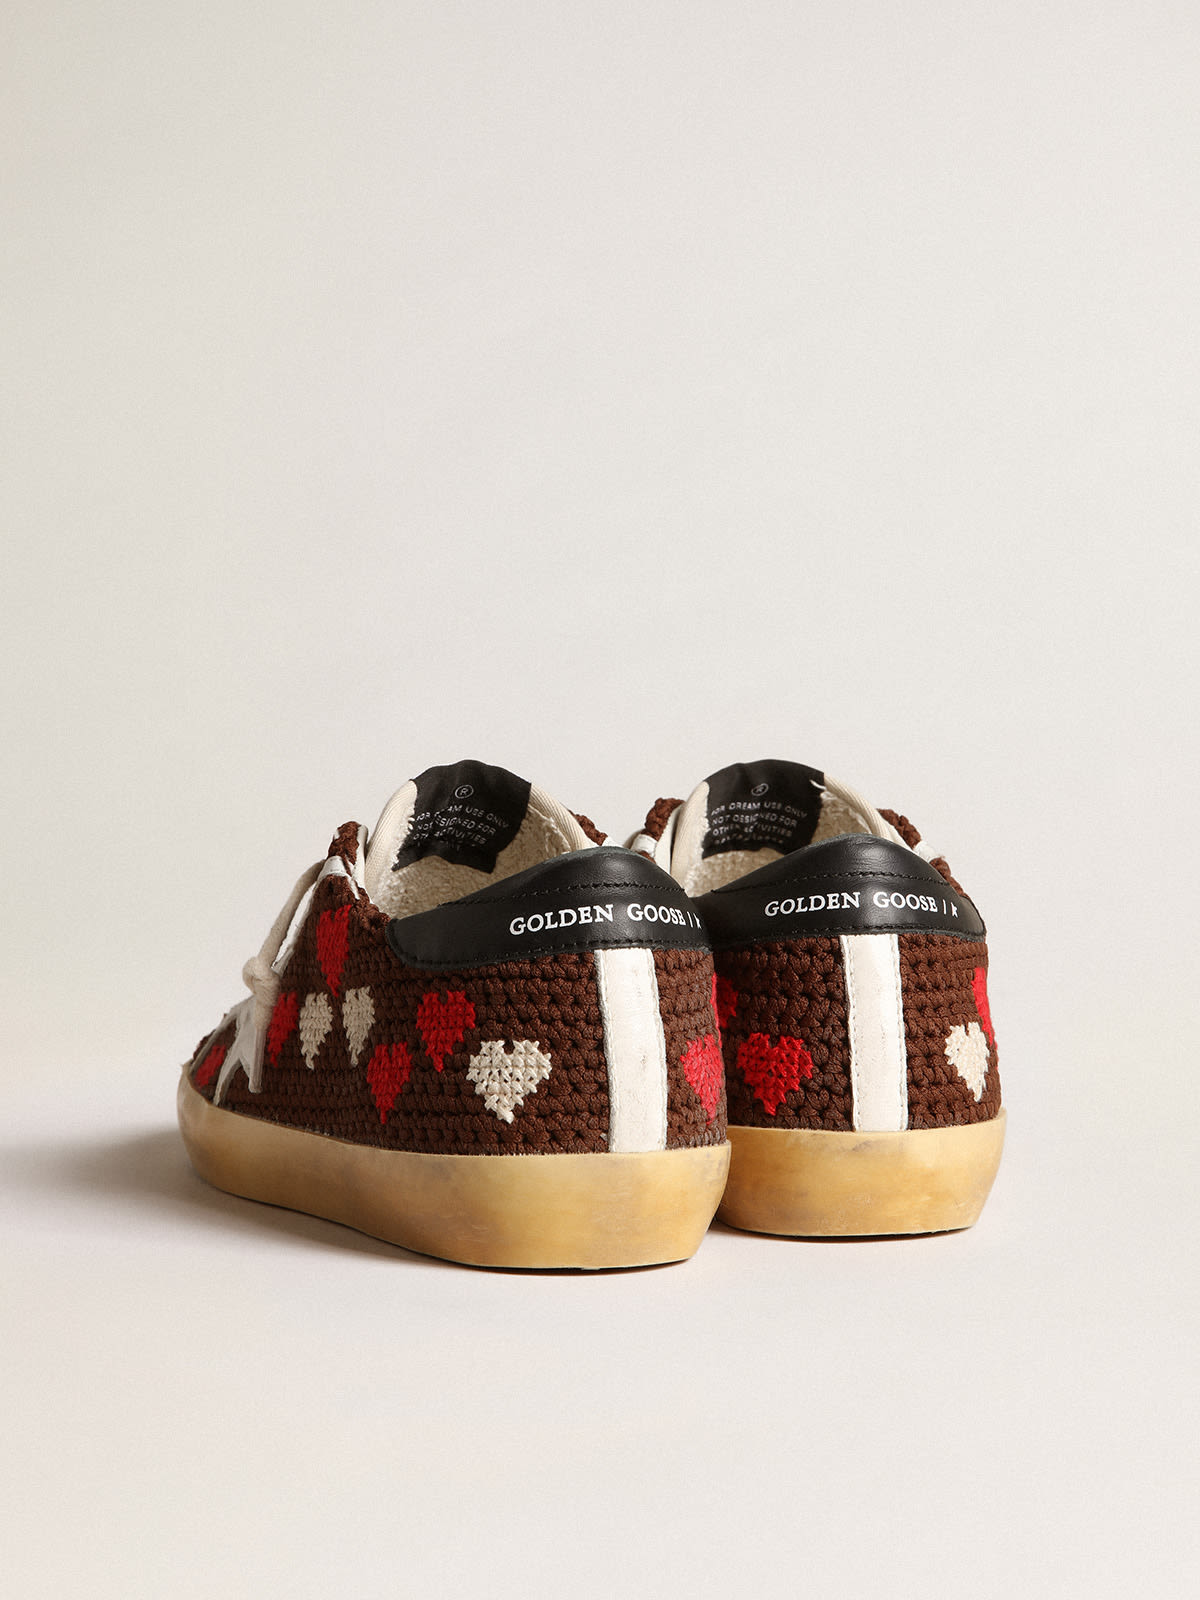 Golden Goose - Super-Star in brown crochet with embroidered hearts and white star in 